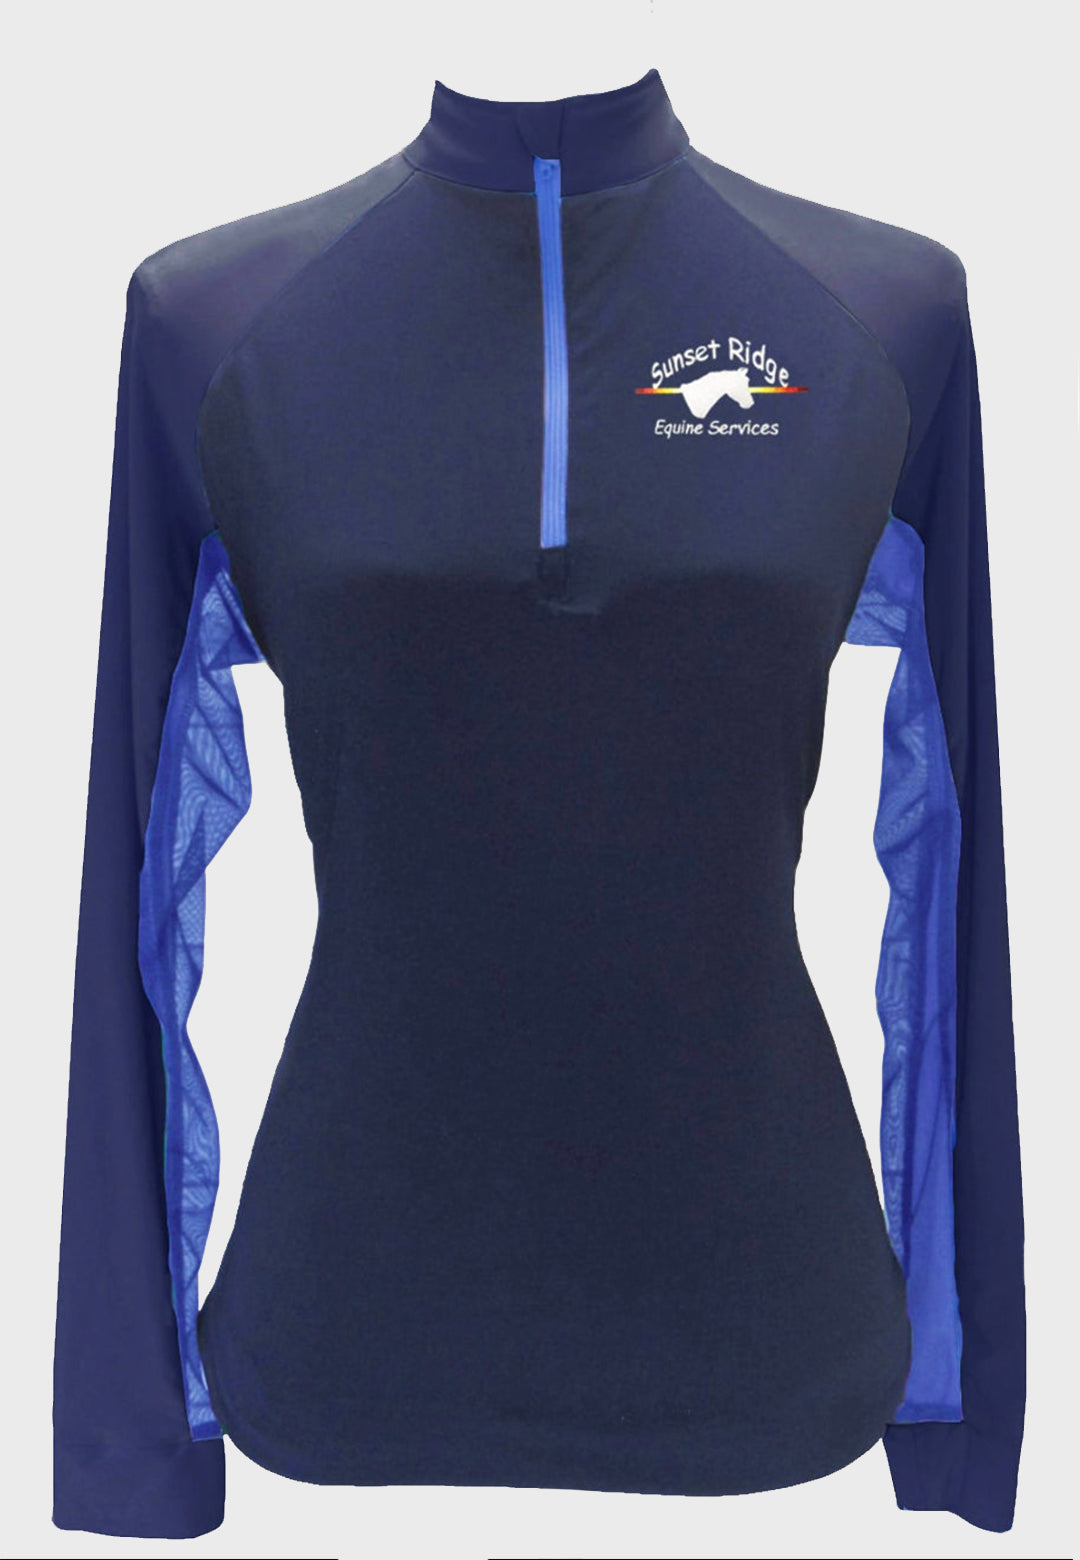 Sunset Ridge Equine Services Custom Sun Shirt - Navy with Royal Blue Accents    Adult + Youth Sizes